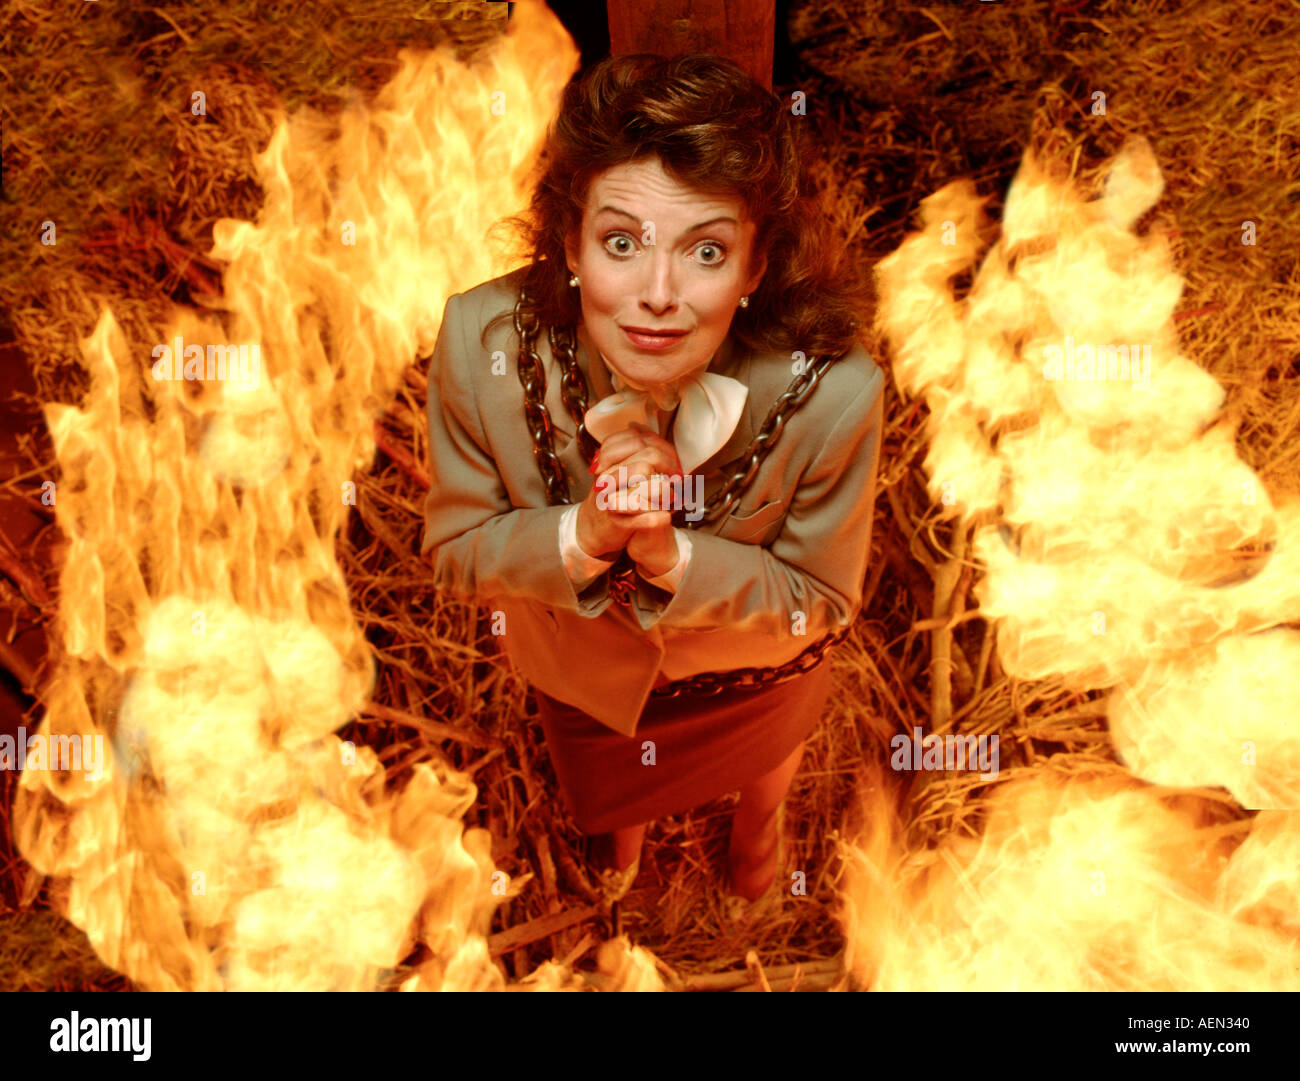 woman burning at the stake on fire Stock Photo